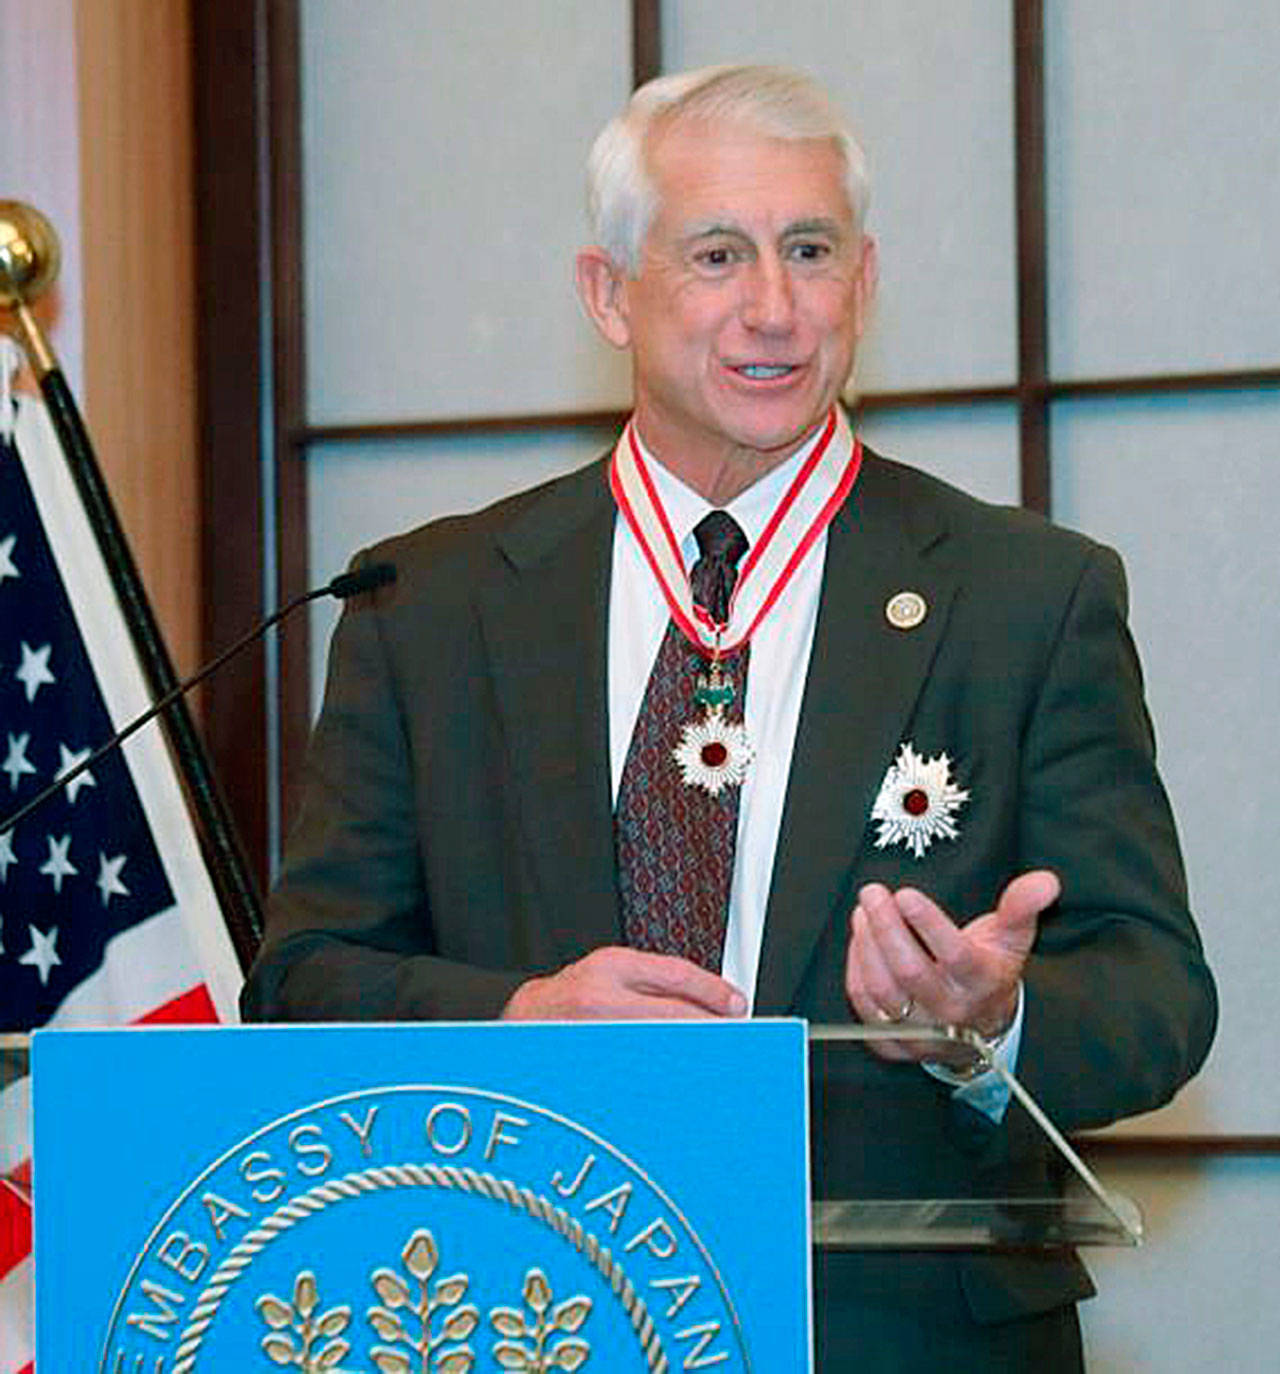 Congressman David Reichert, R-Auburn, speaks at a ceremony after receiving the Order of the Rising Sun, Gold and Silver Star from Japan for his work. COURTESY PHOTO